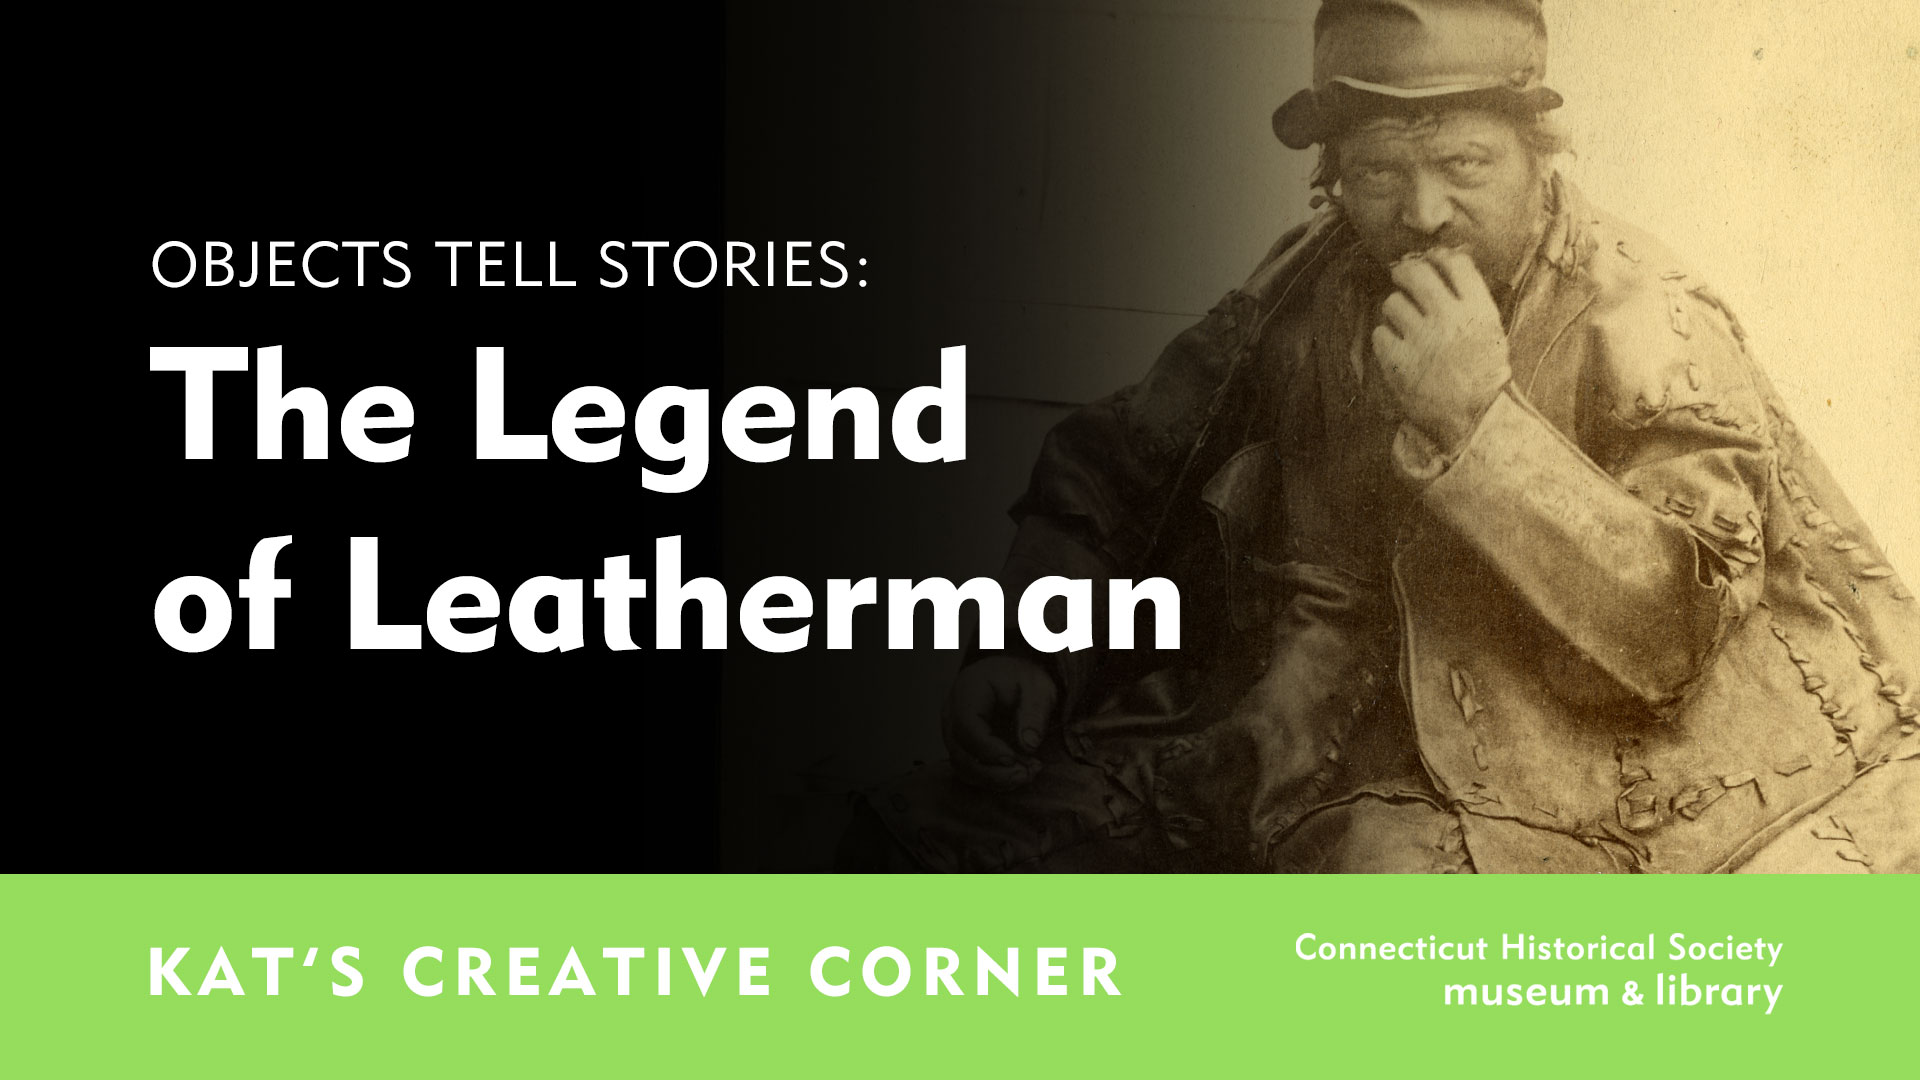 Objects Tell Stories: The Legend of Leatherman